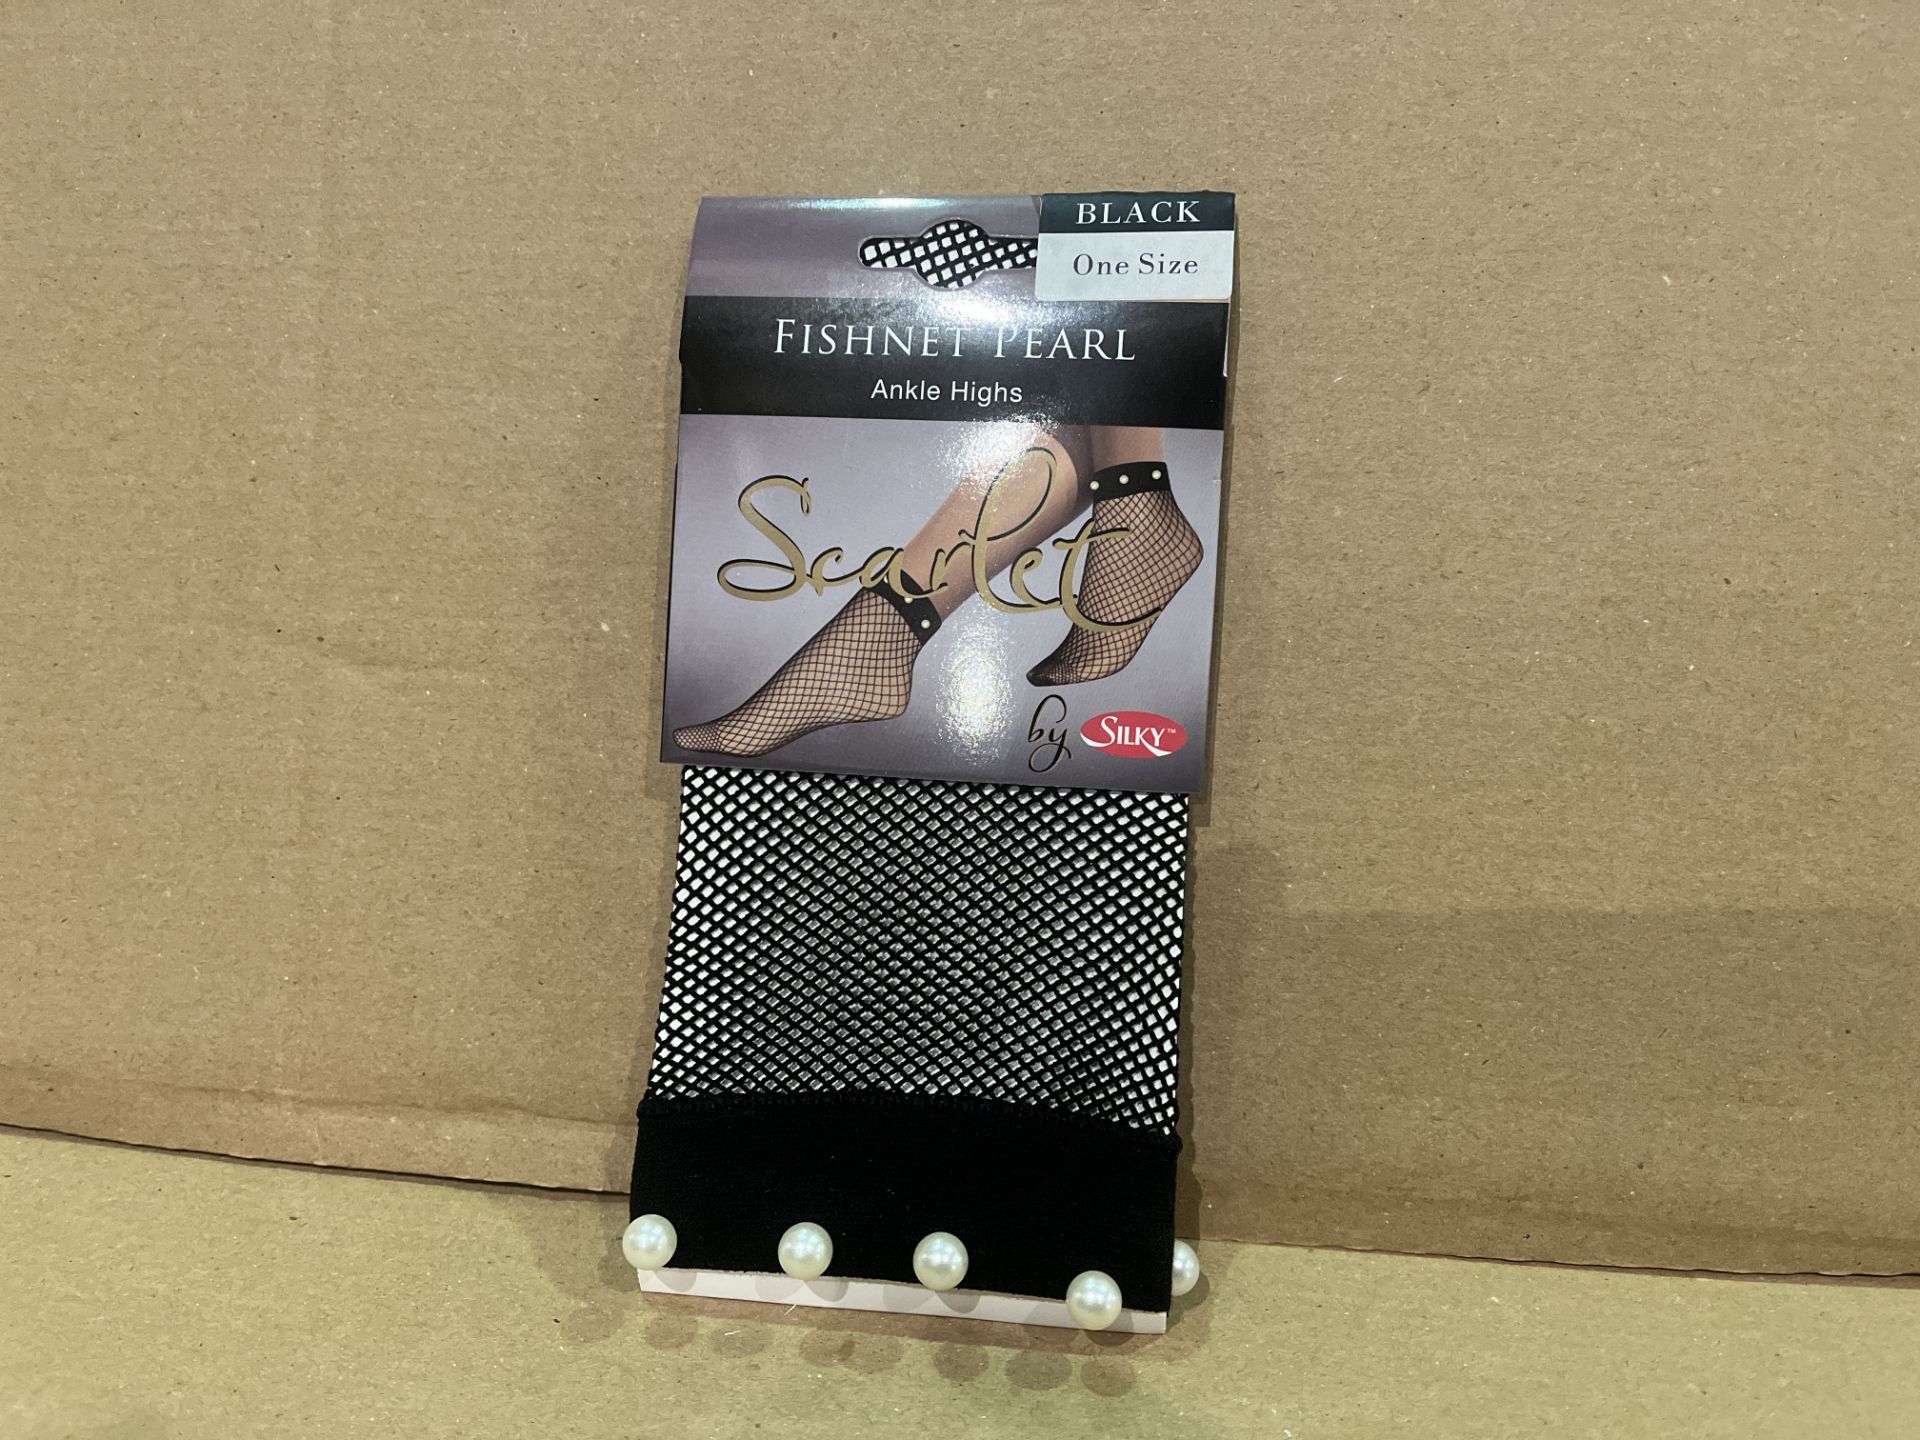 150 X BRAND NEW SILKY FISHNET PEARL ANKLE HIGHS R12